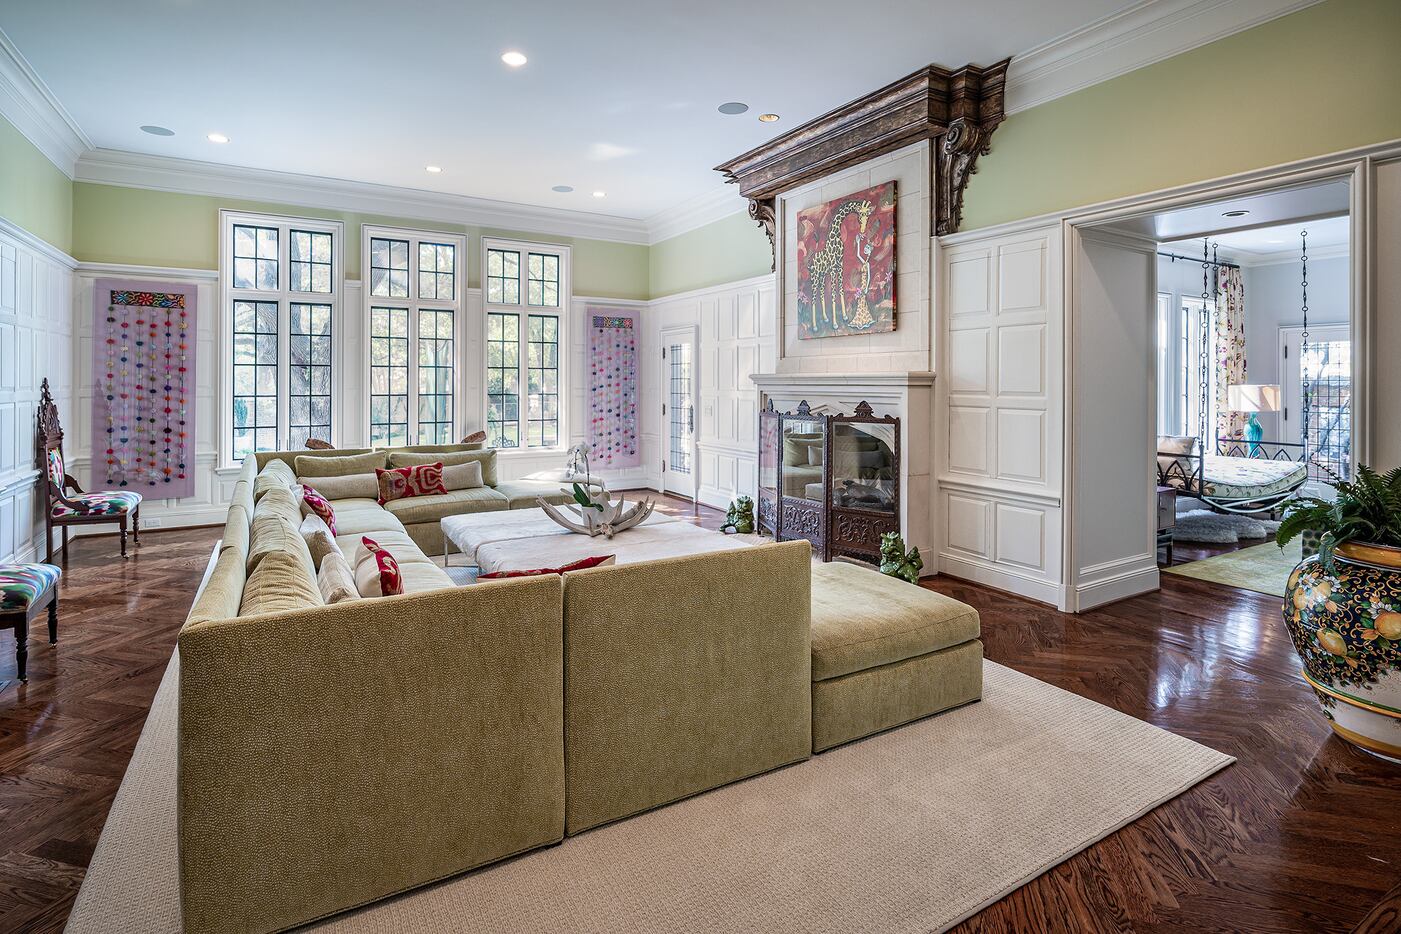 Take a look at the home at 4201 Arcady Ave. in Highland Park.